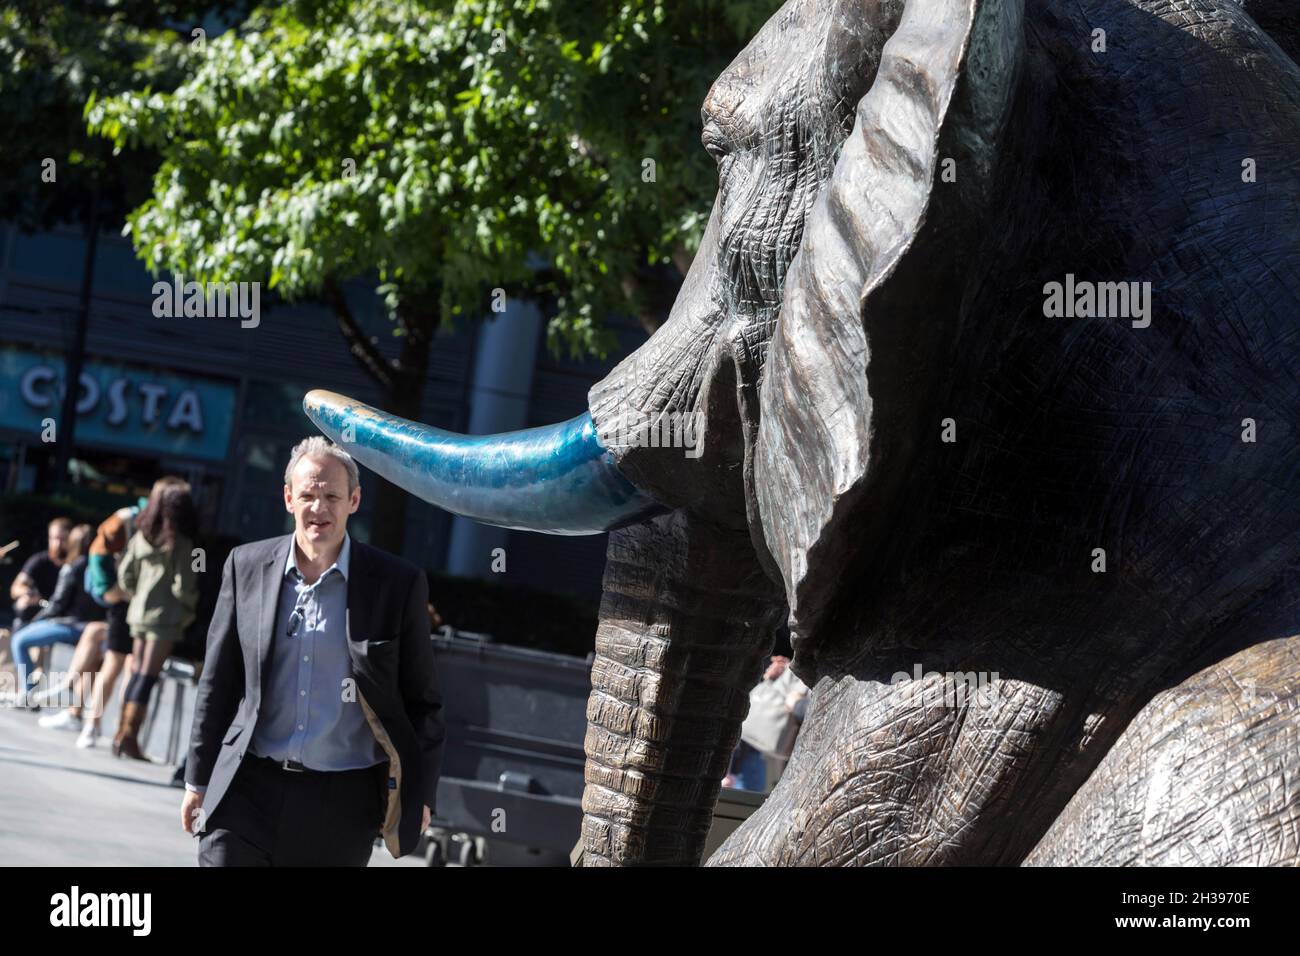 A man approaches an elephant sculpture, part of Herd of Hope by Gillie and Marc, at Spitalfields, east London. Stock Photo